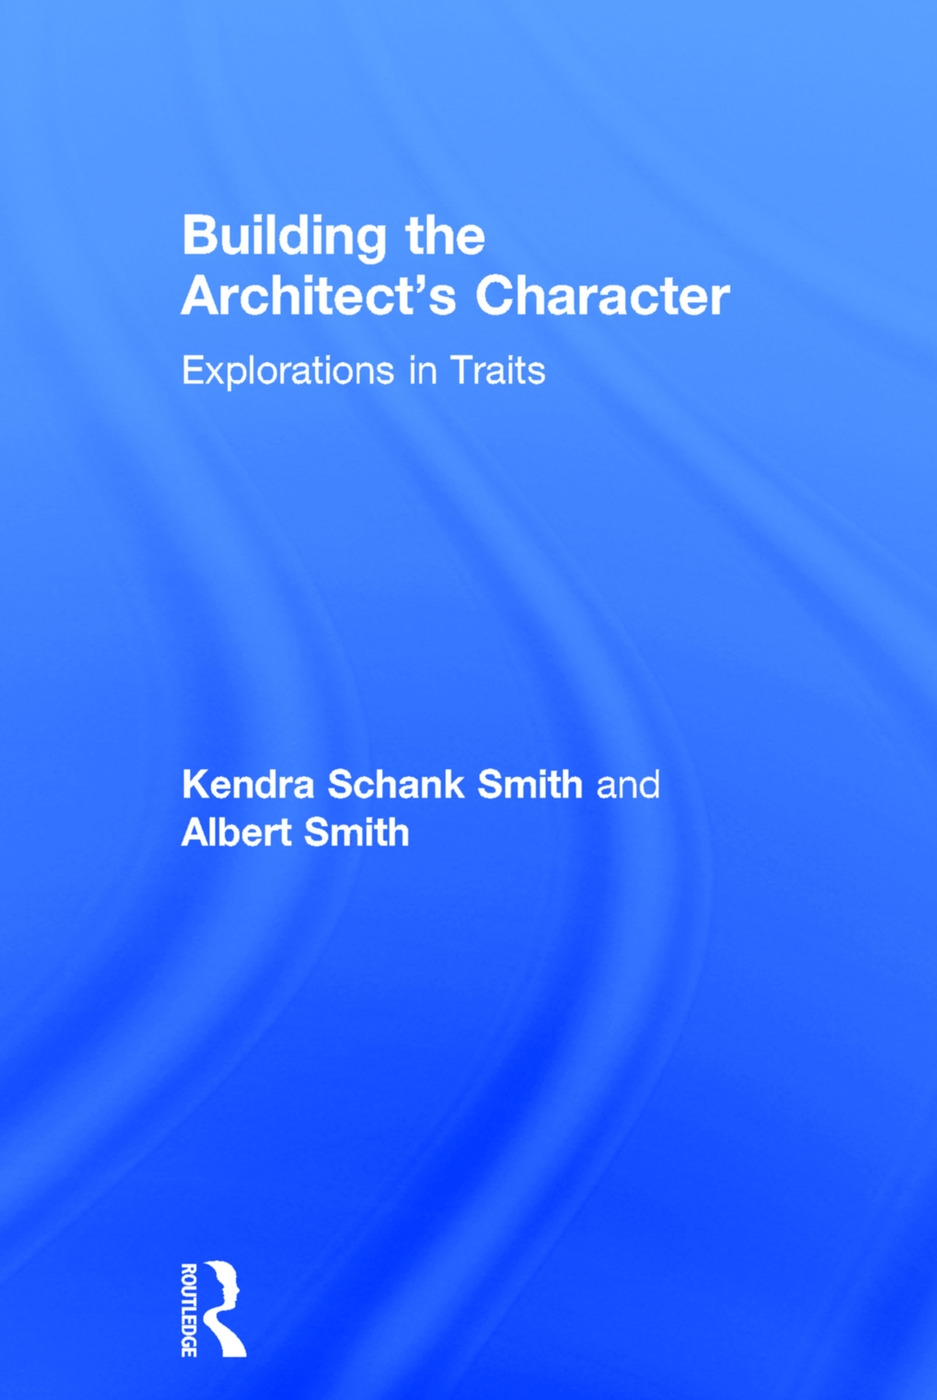 Building the Architect’s Character: Explorations in Traits